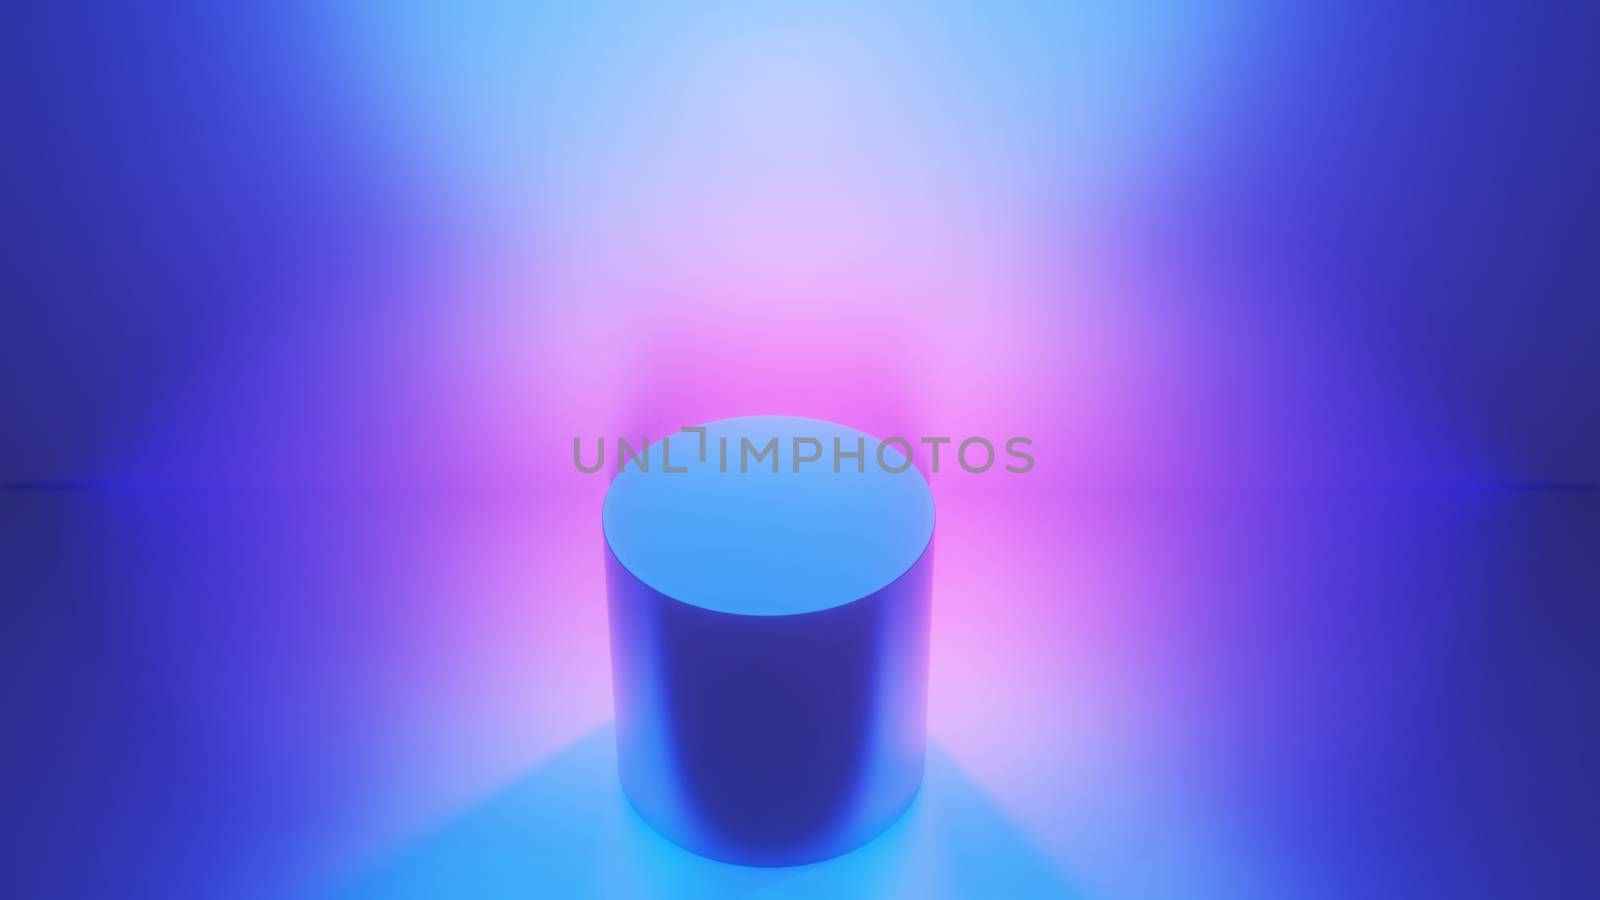 Product display stand for display of content design. Abstract fashion background, ultraviolet neon lights, pink blue vibrant colors, laser show. Banner for advertise product. 3D illustration